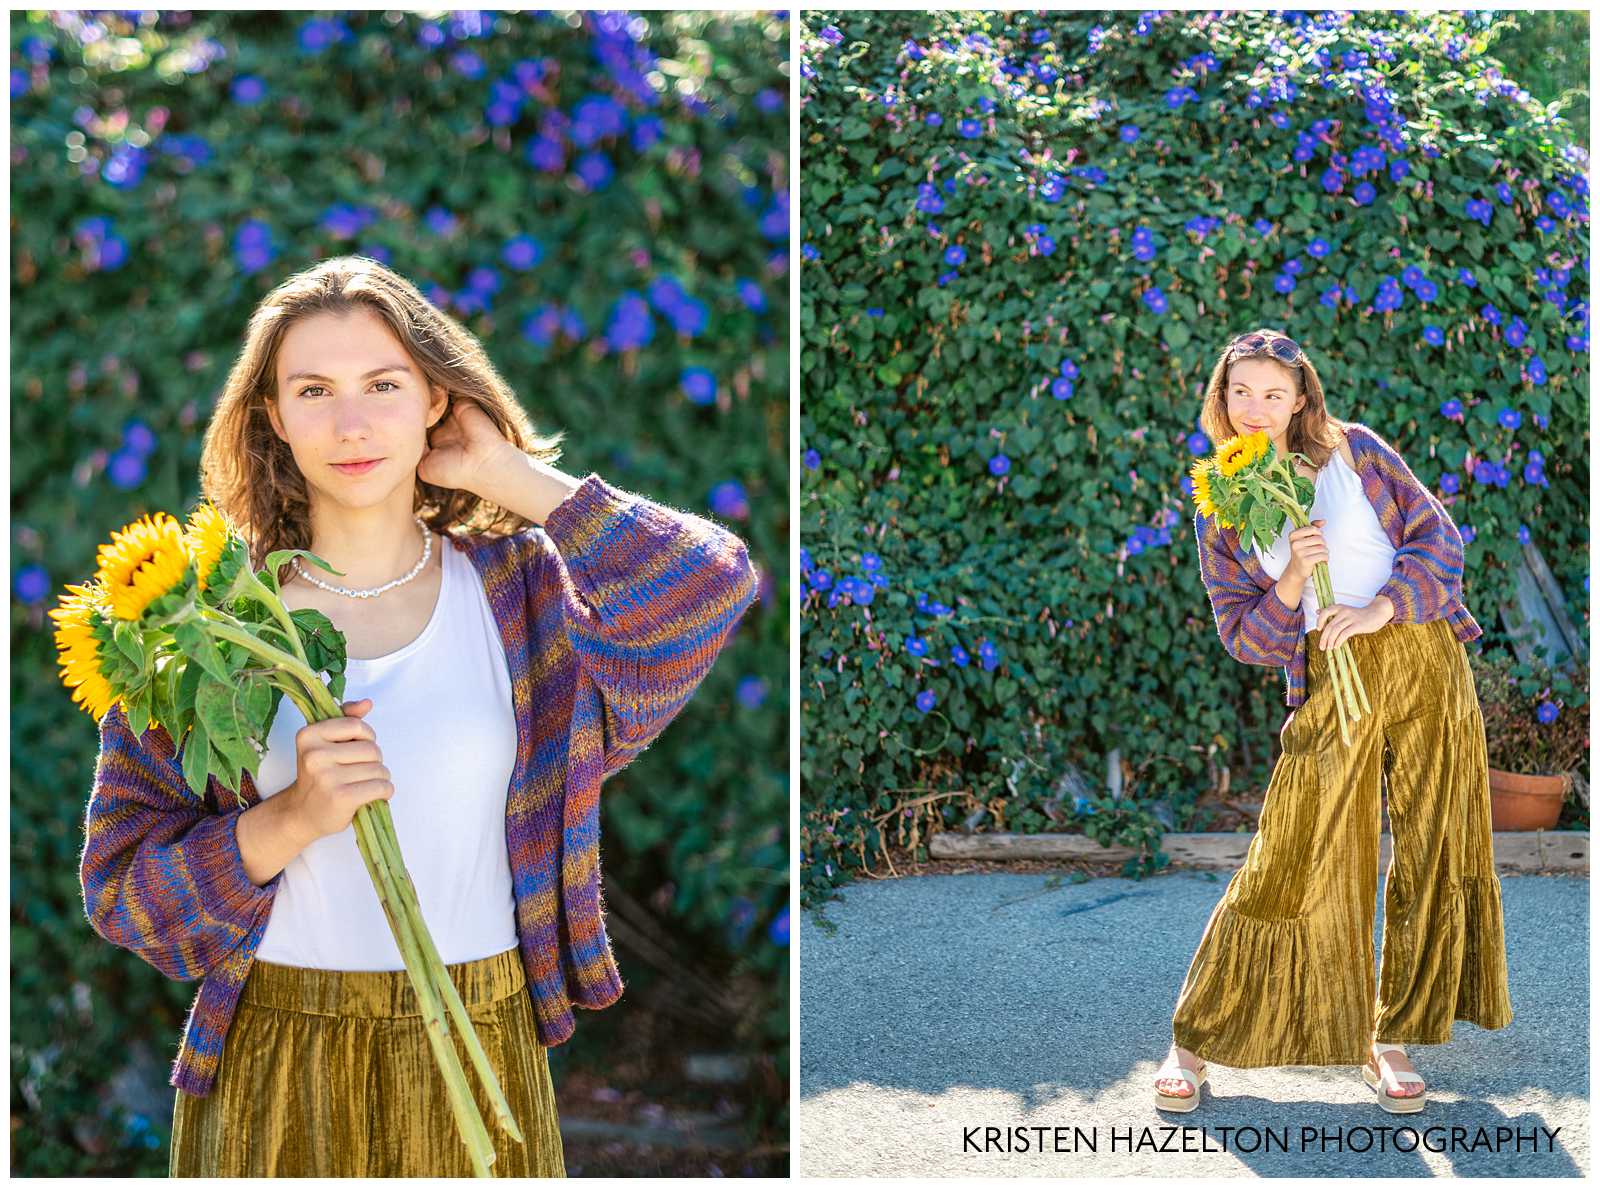 High school senior portraits with sunflowers and blue morning glories